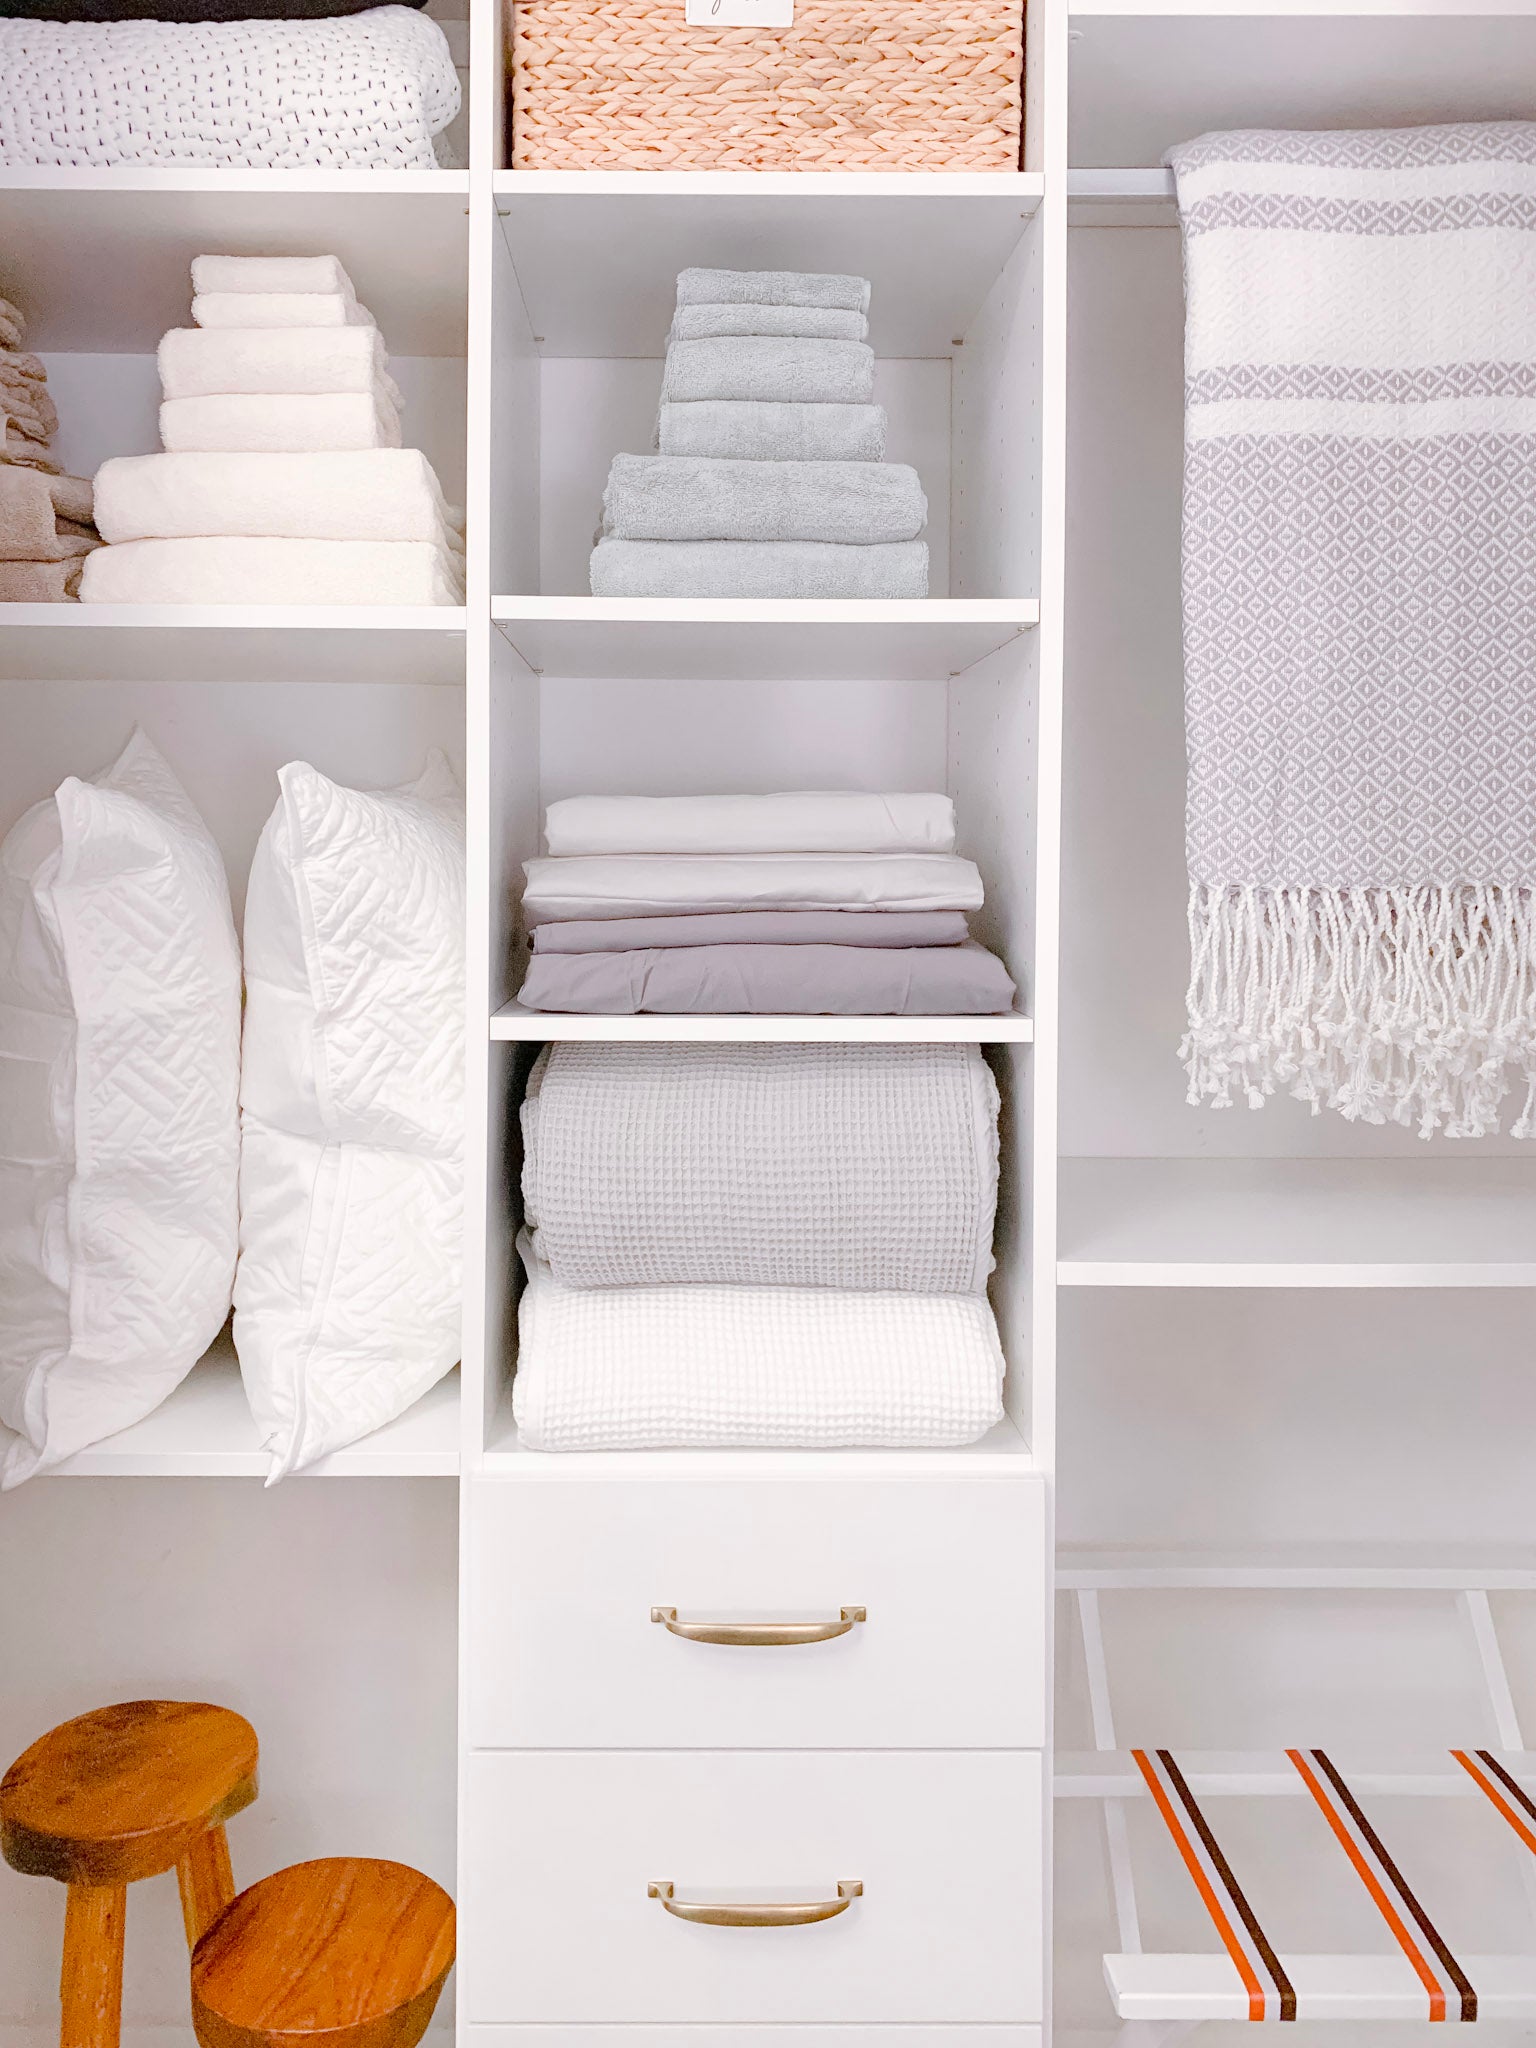 Utility Closet Organization: Your Complete Guide - Clutter Keeper®